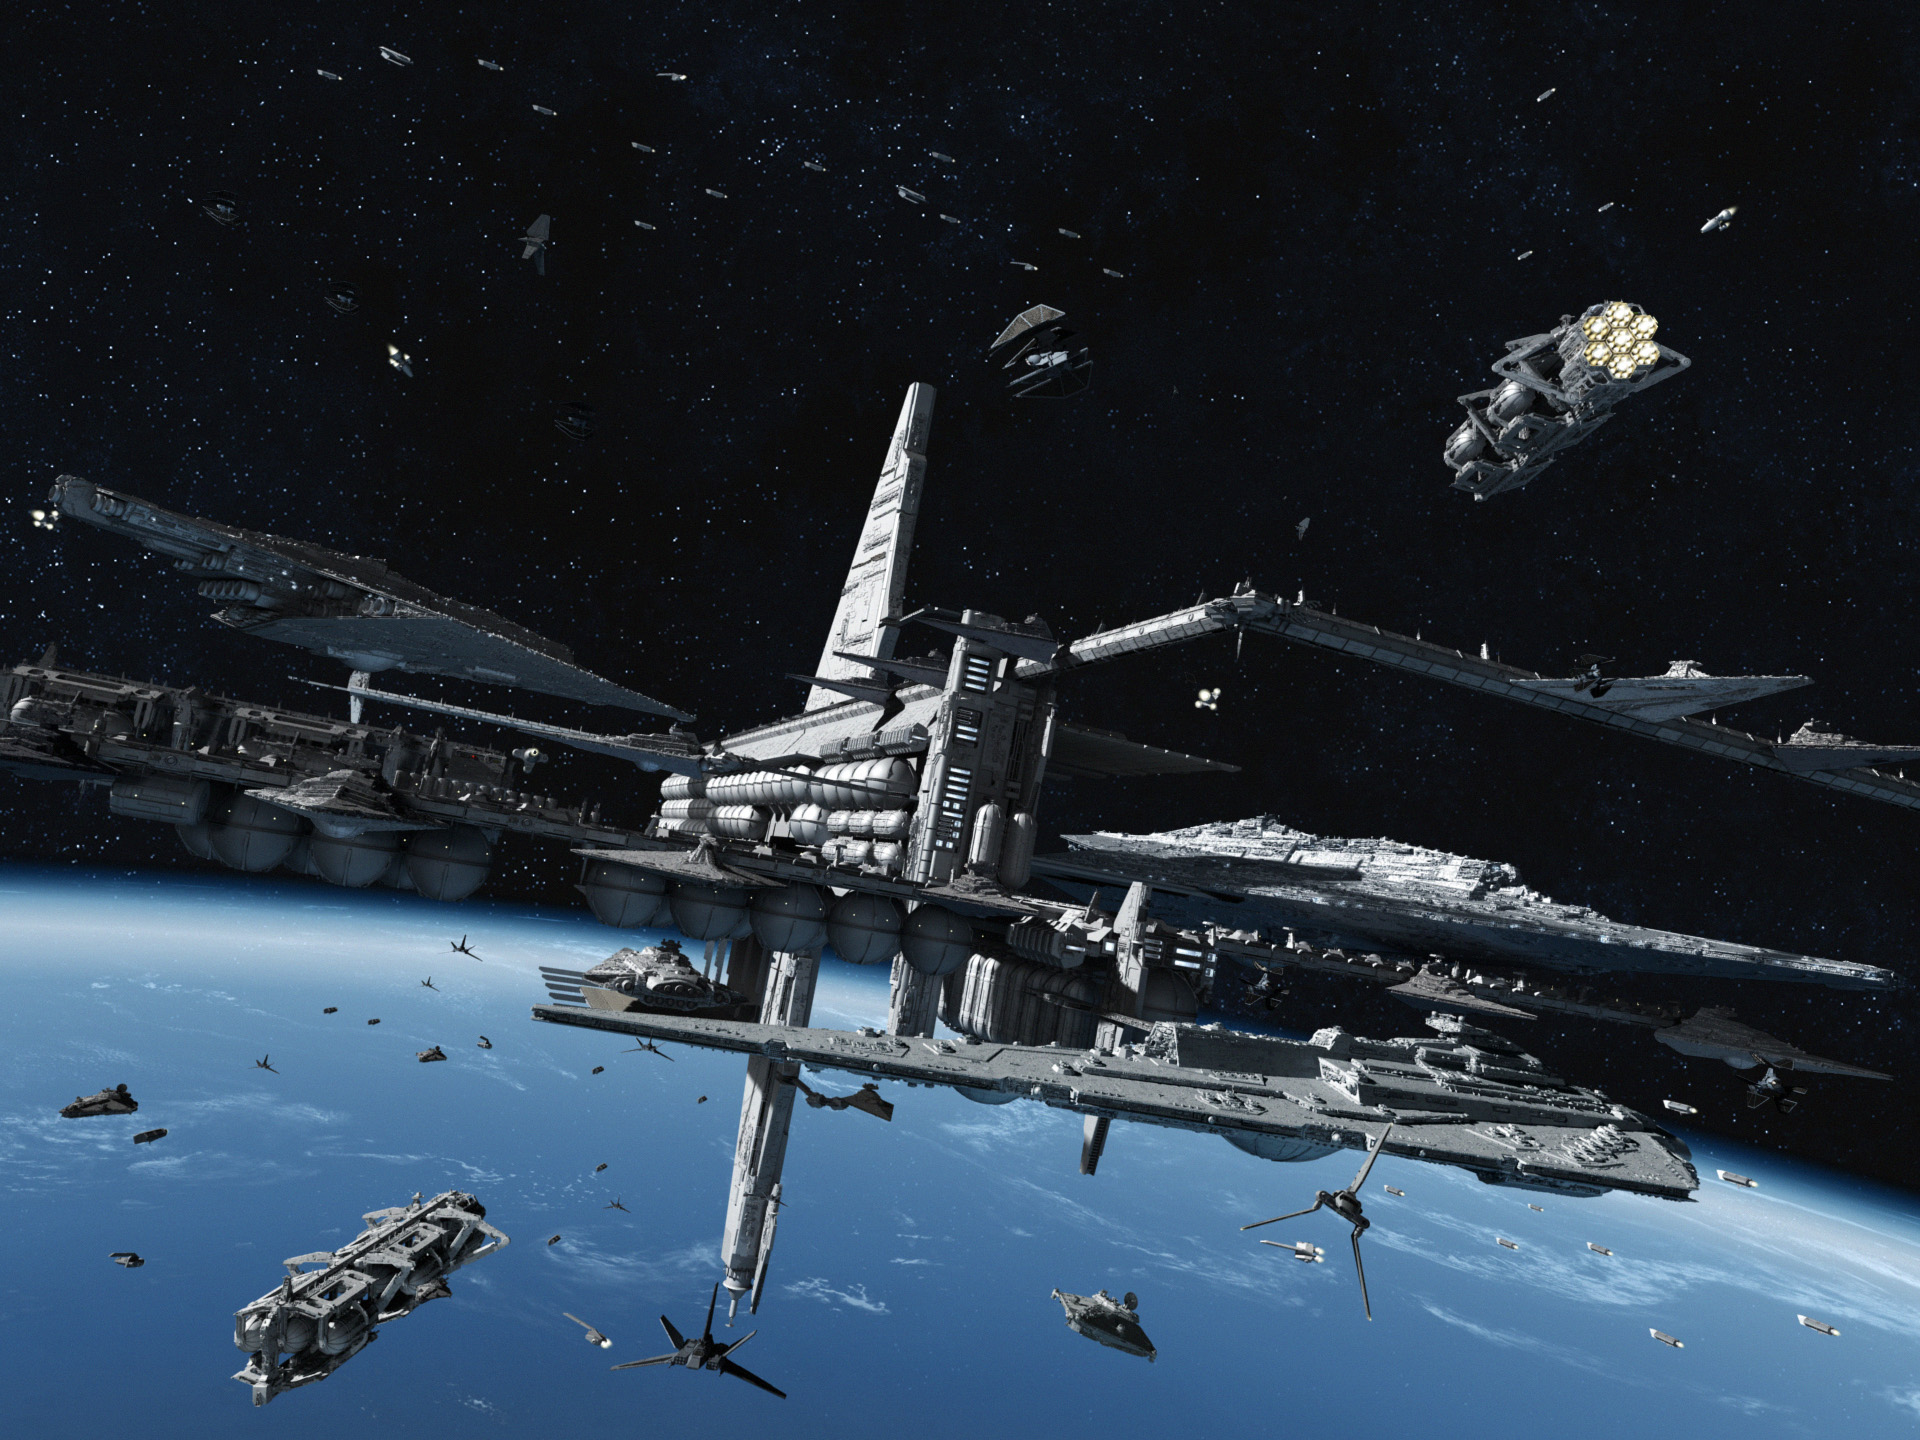 star wars ships wallpaper,space station,outer space,vehicle,spacecraft,space shuttle